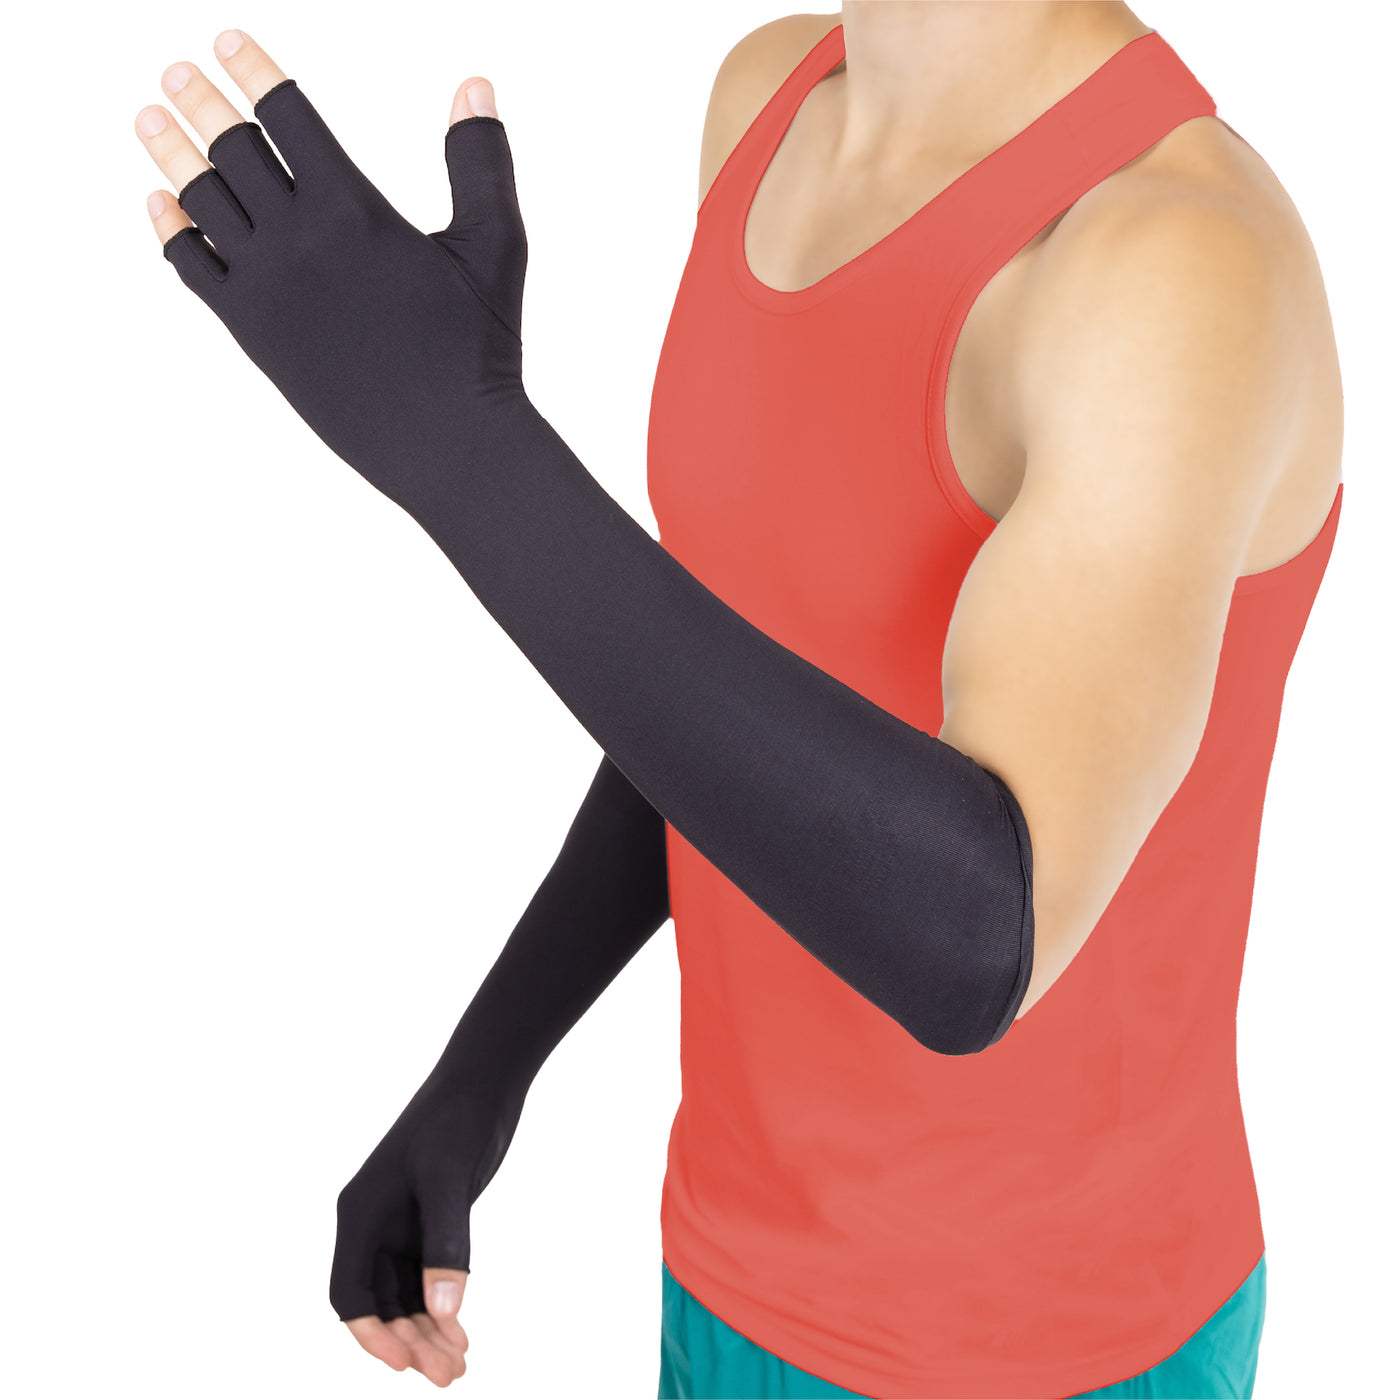 BraceAbility fingerless copper compression gloves are full arm sleeves for carpal tunnel